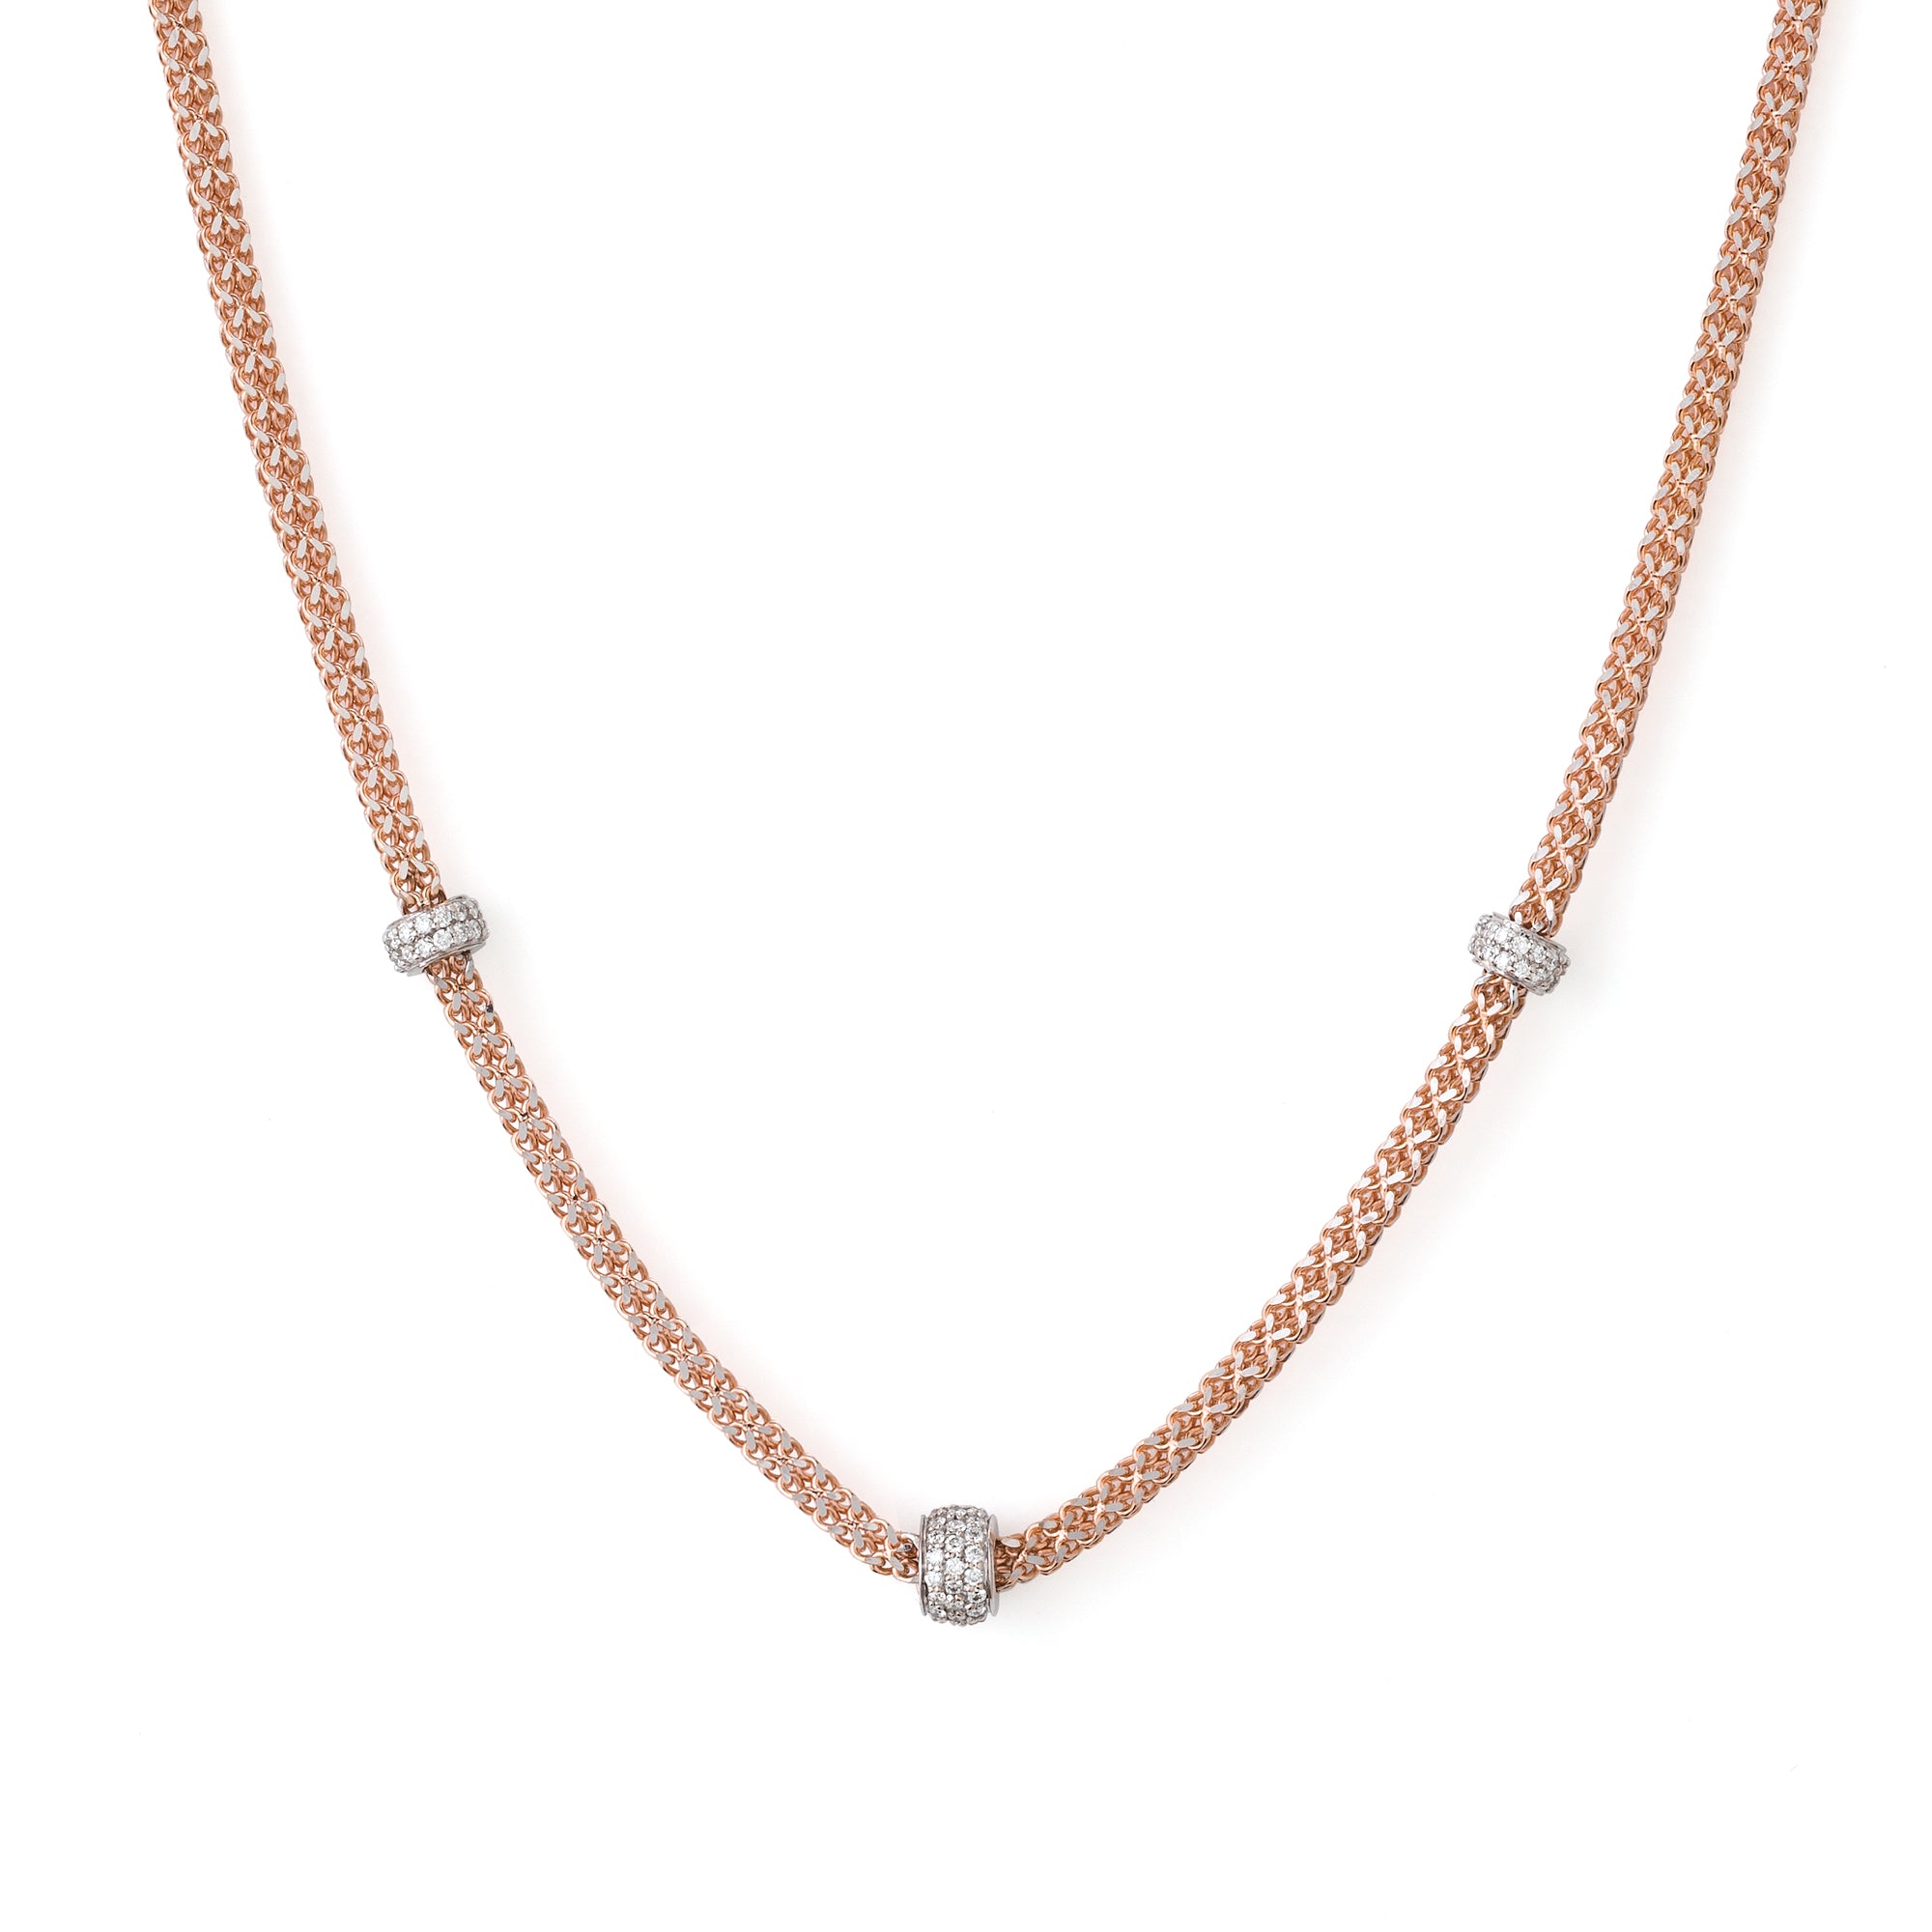 Heritage necklace in pink gold and 3 diamonds